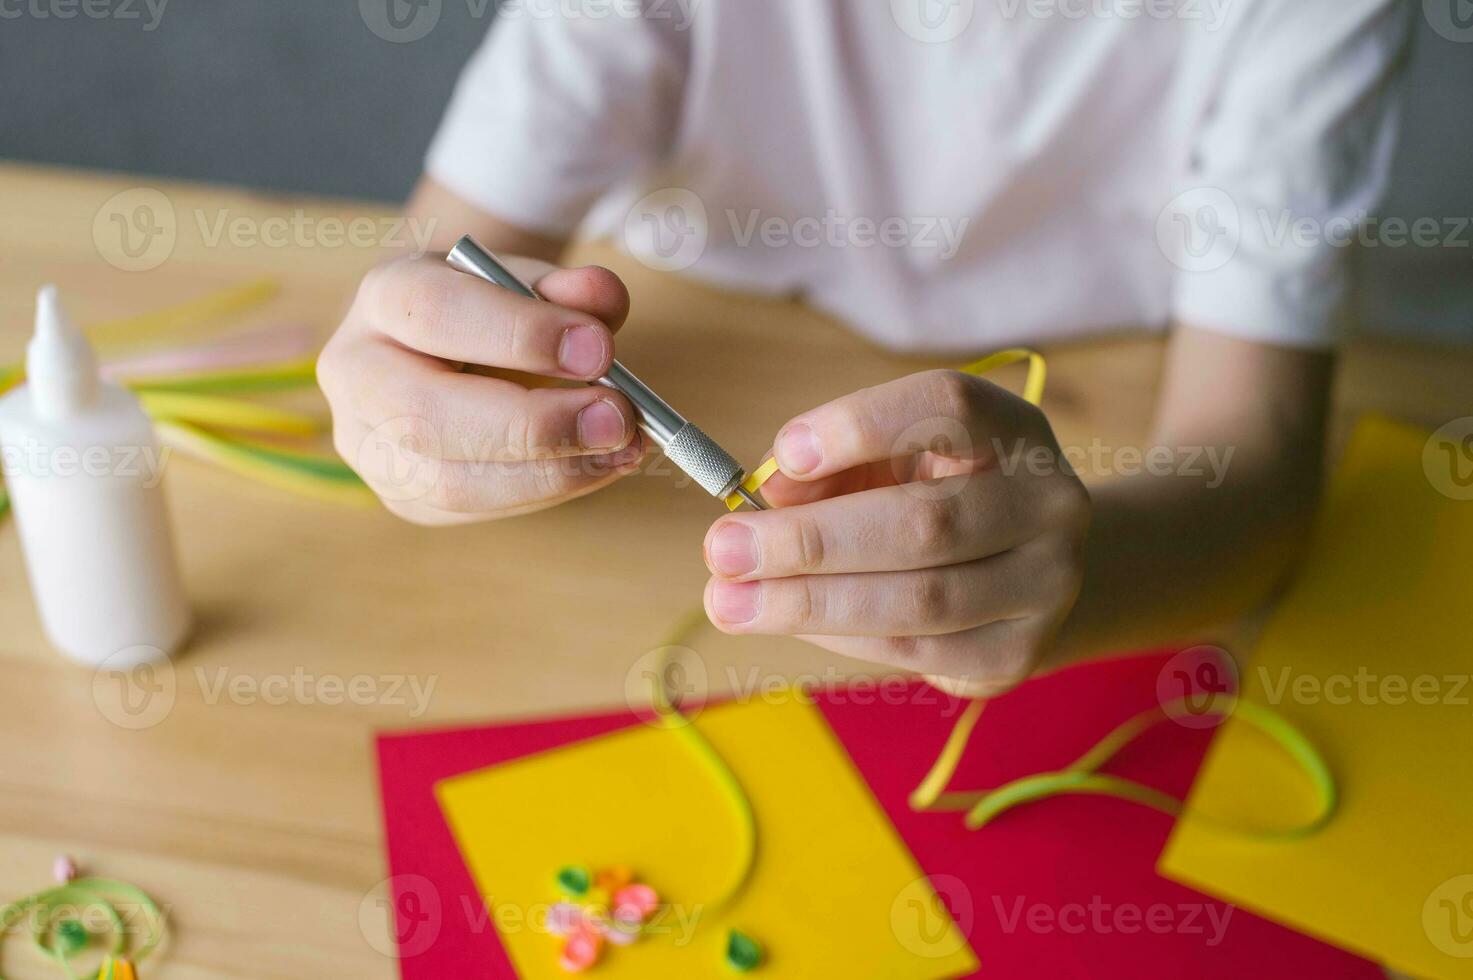 Making a postcard from long and narrow strips of paper twisted into spirals with an awl, quilling photo